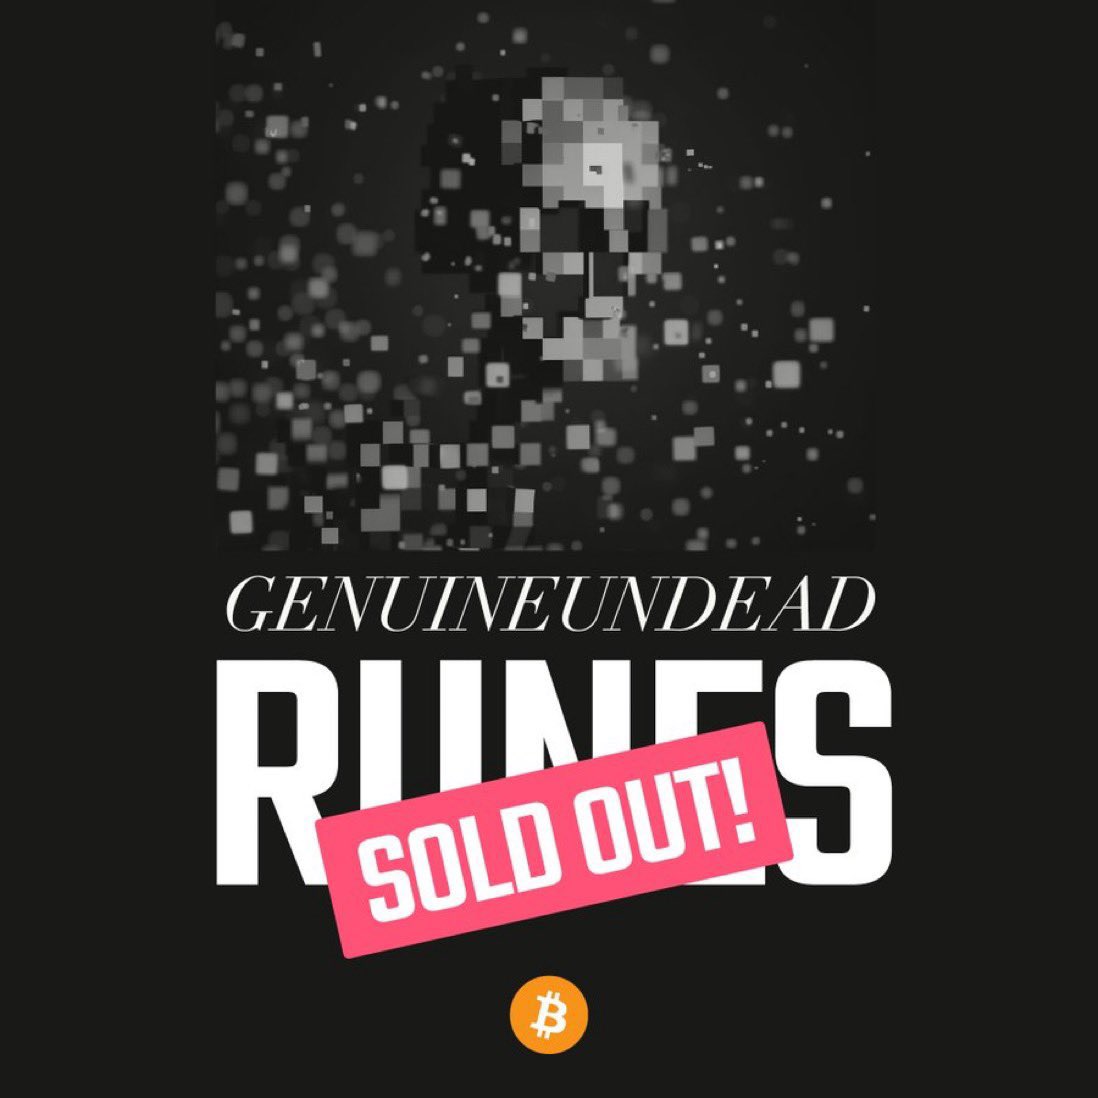 If you missed the mint…grab your GENUINEUNDEAD RUNE on secondary #Runes #GenuineUndead magiceden.io/runes/GENUINEU…